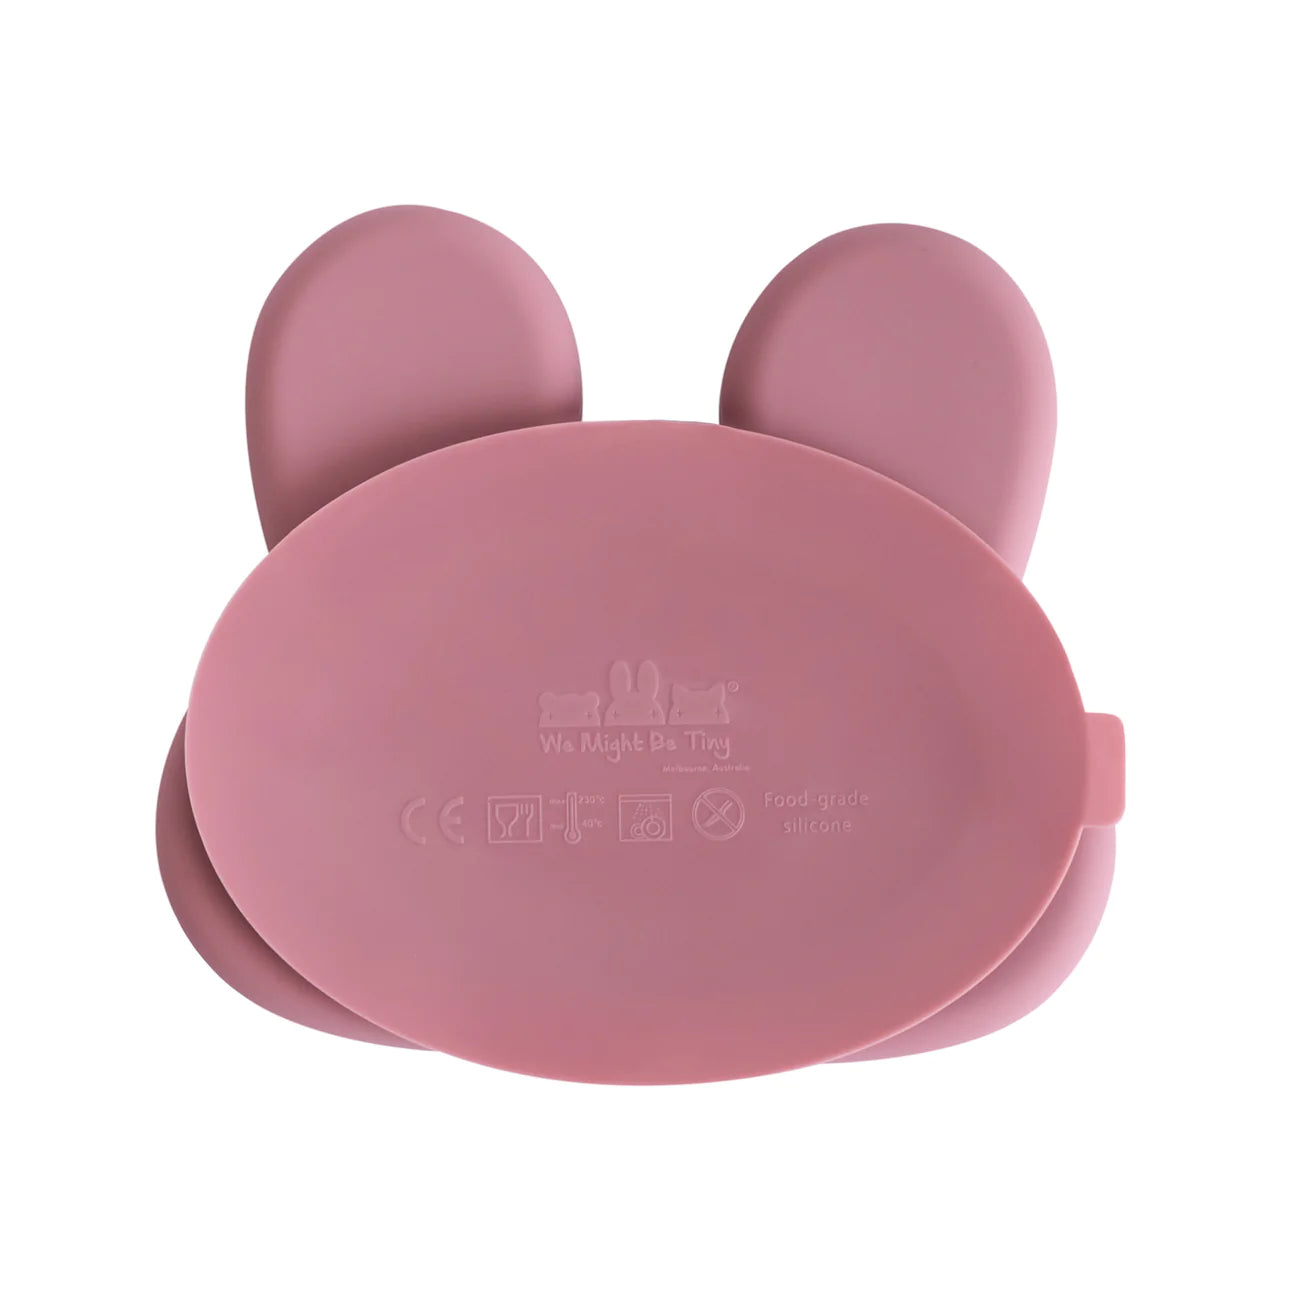 We Might Be Tiny Stickie Plate Bunny. Dusty Rose